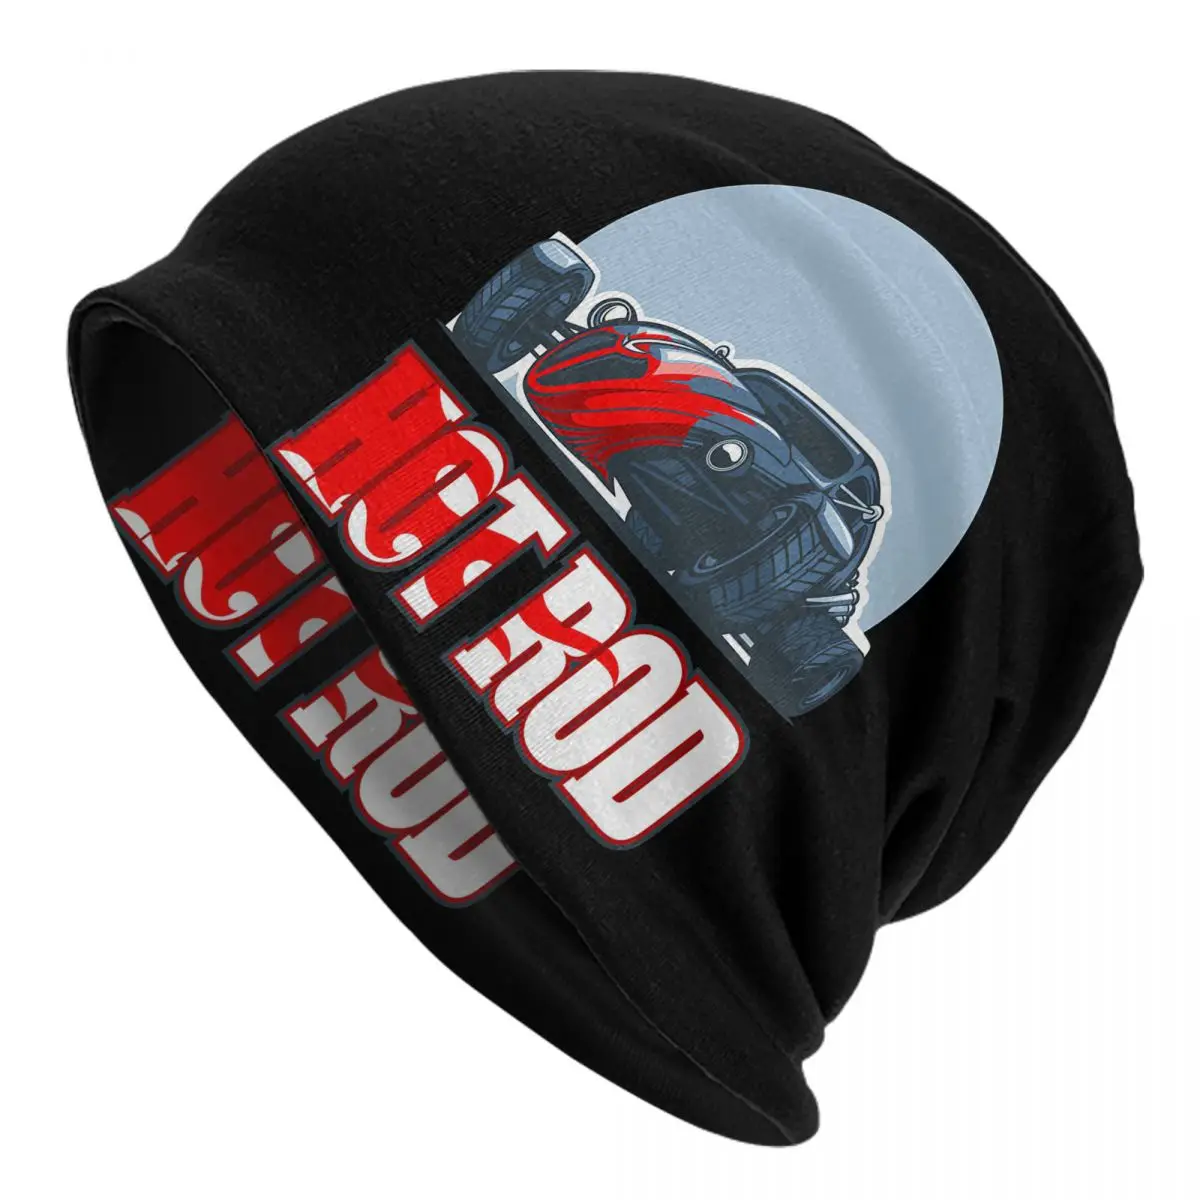 Hot Rod Racing Car Vintage Retro American Gift Adult Men's Women's Knit Hat Keep warm winter knitted hat